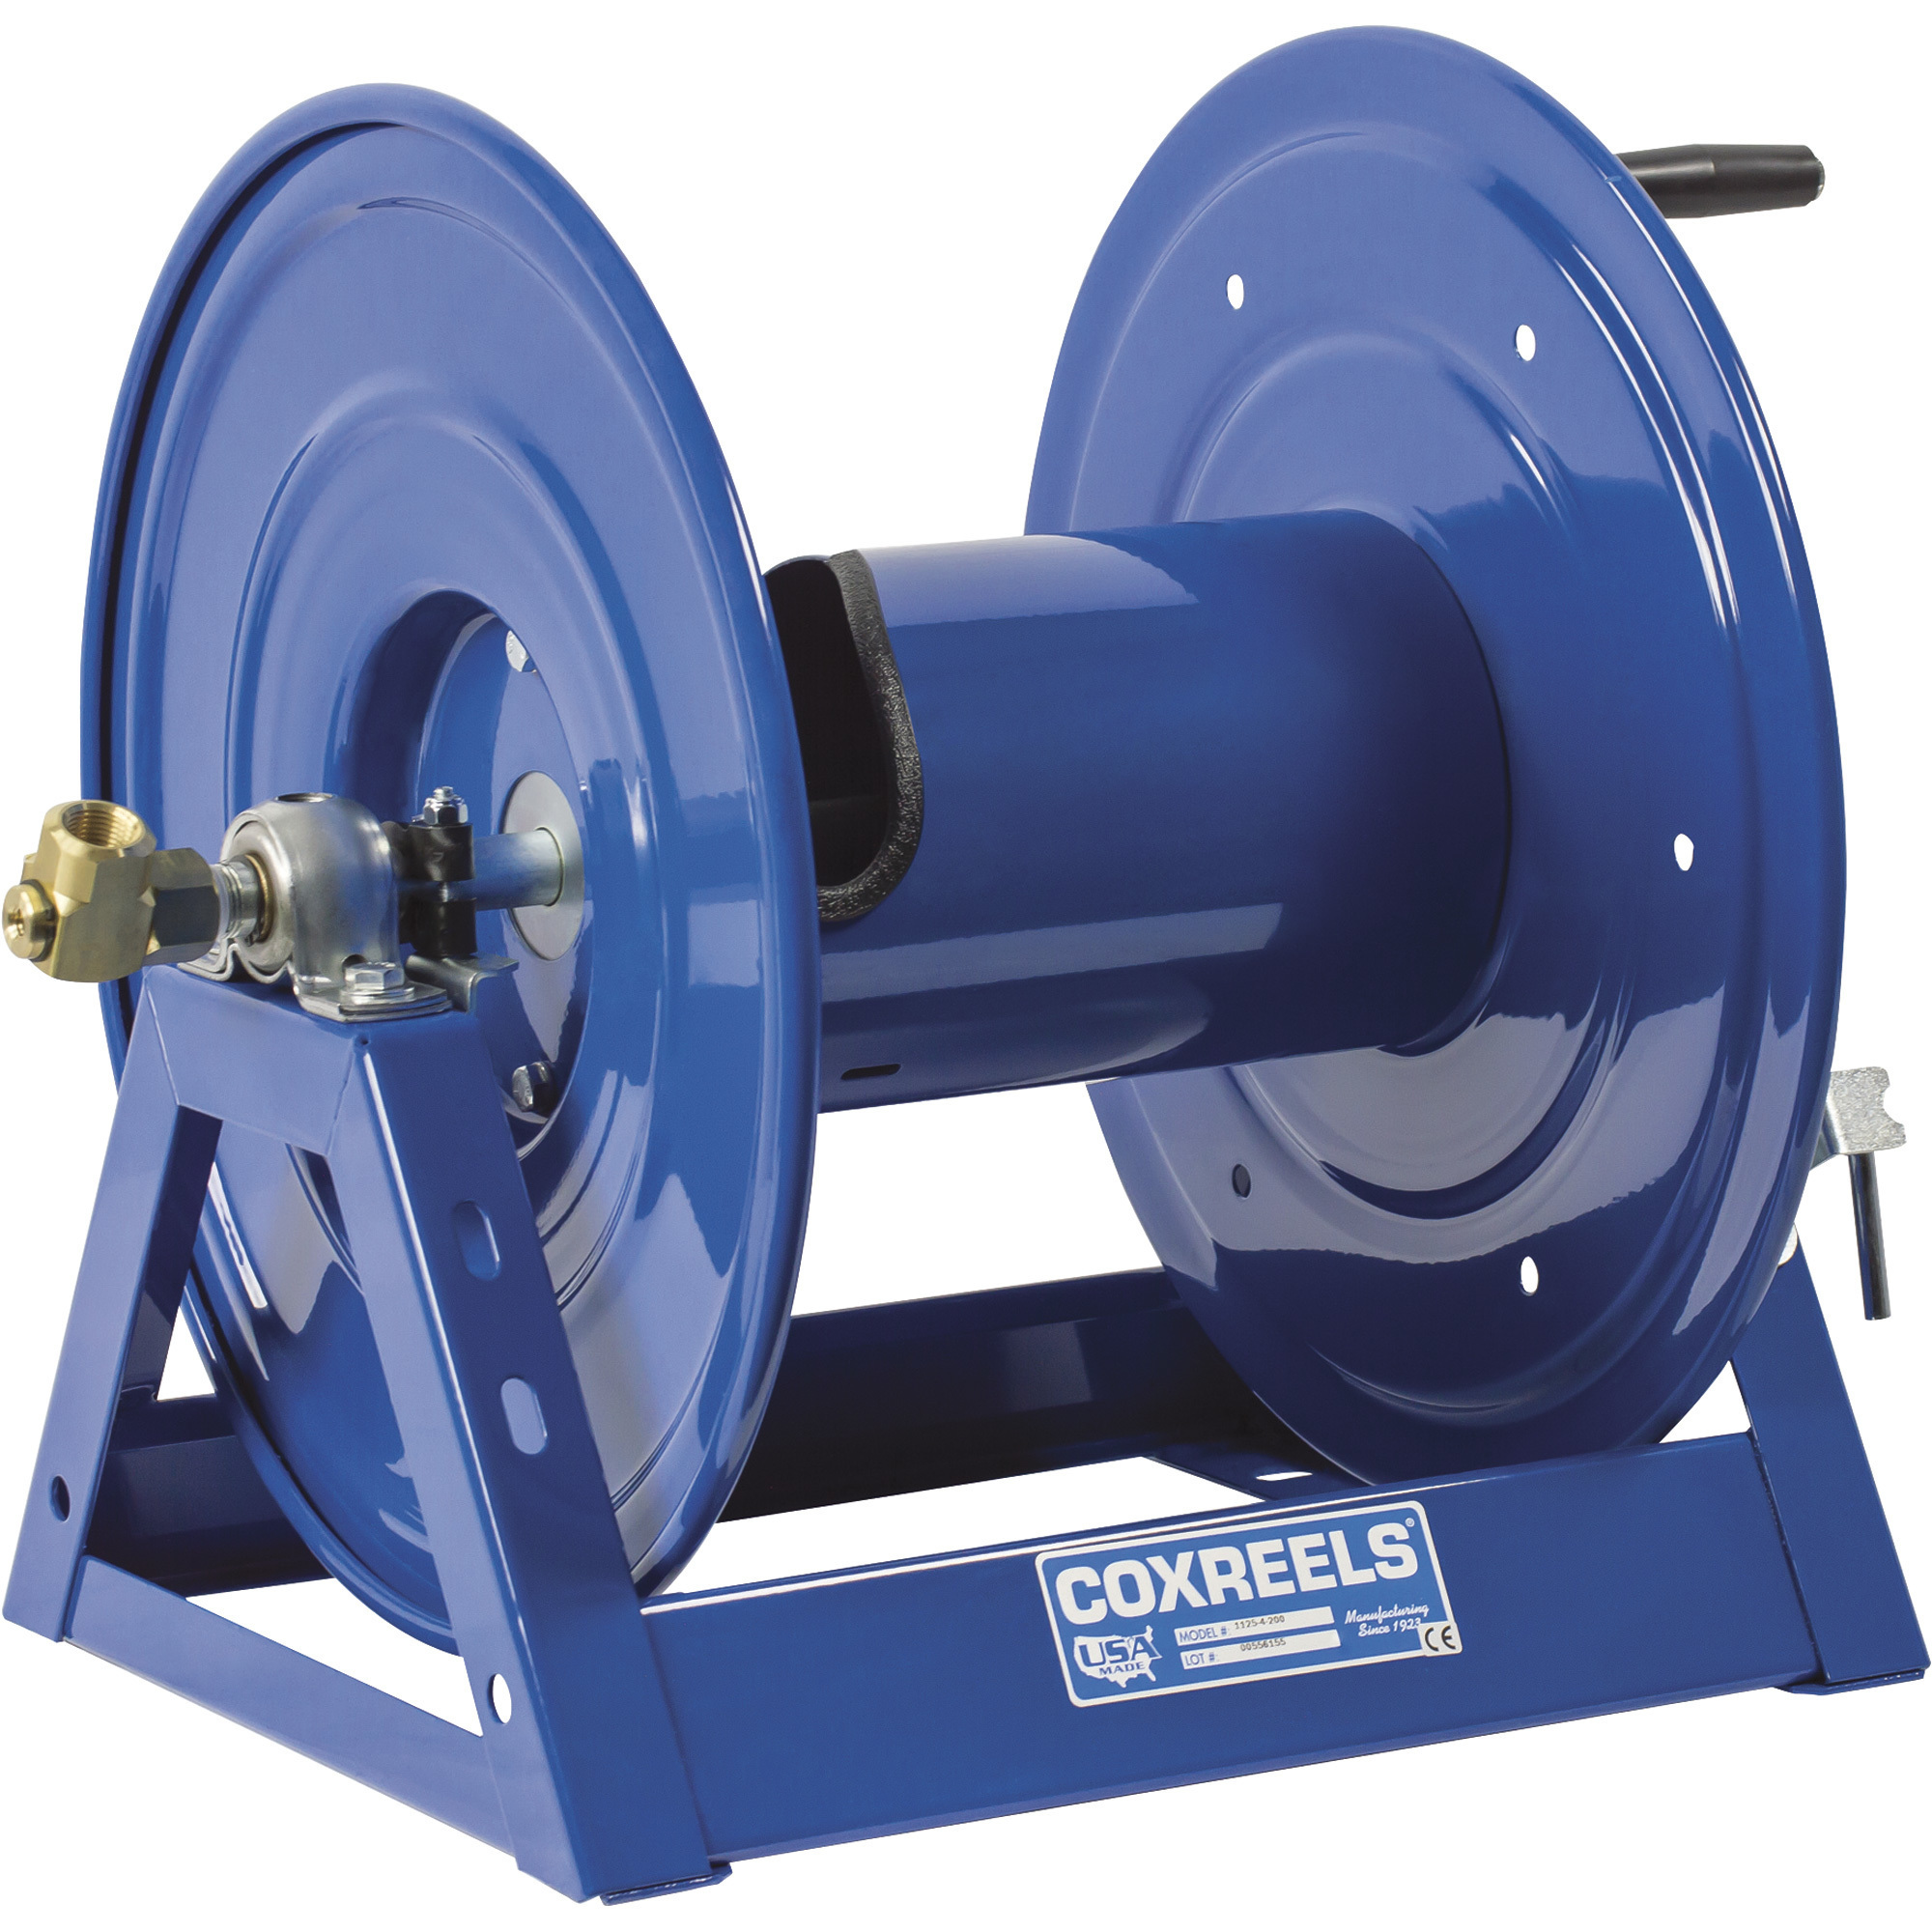 Competitor Series Hose Reel — Holds 1/2Inch x 100ft. Hose, Max. 3000 PSI, Model - Coxreels 1125-4-100